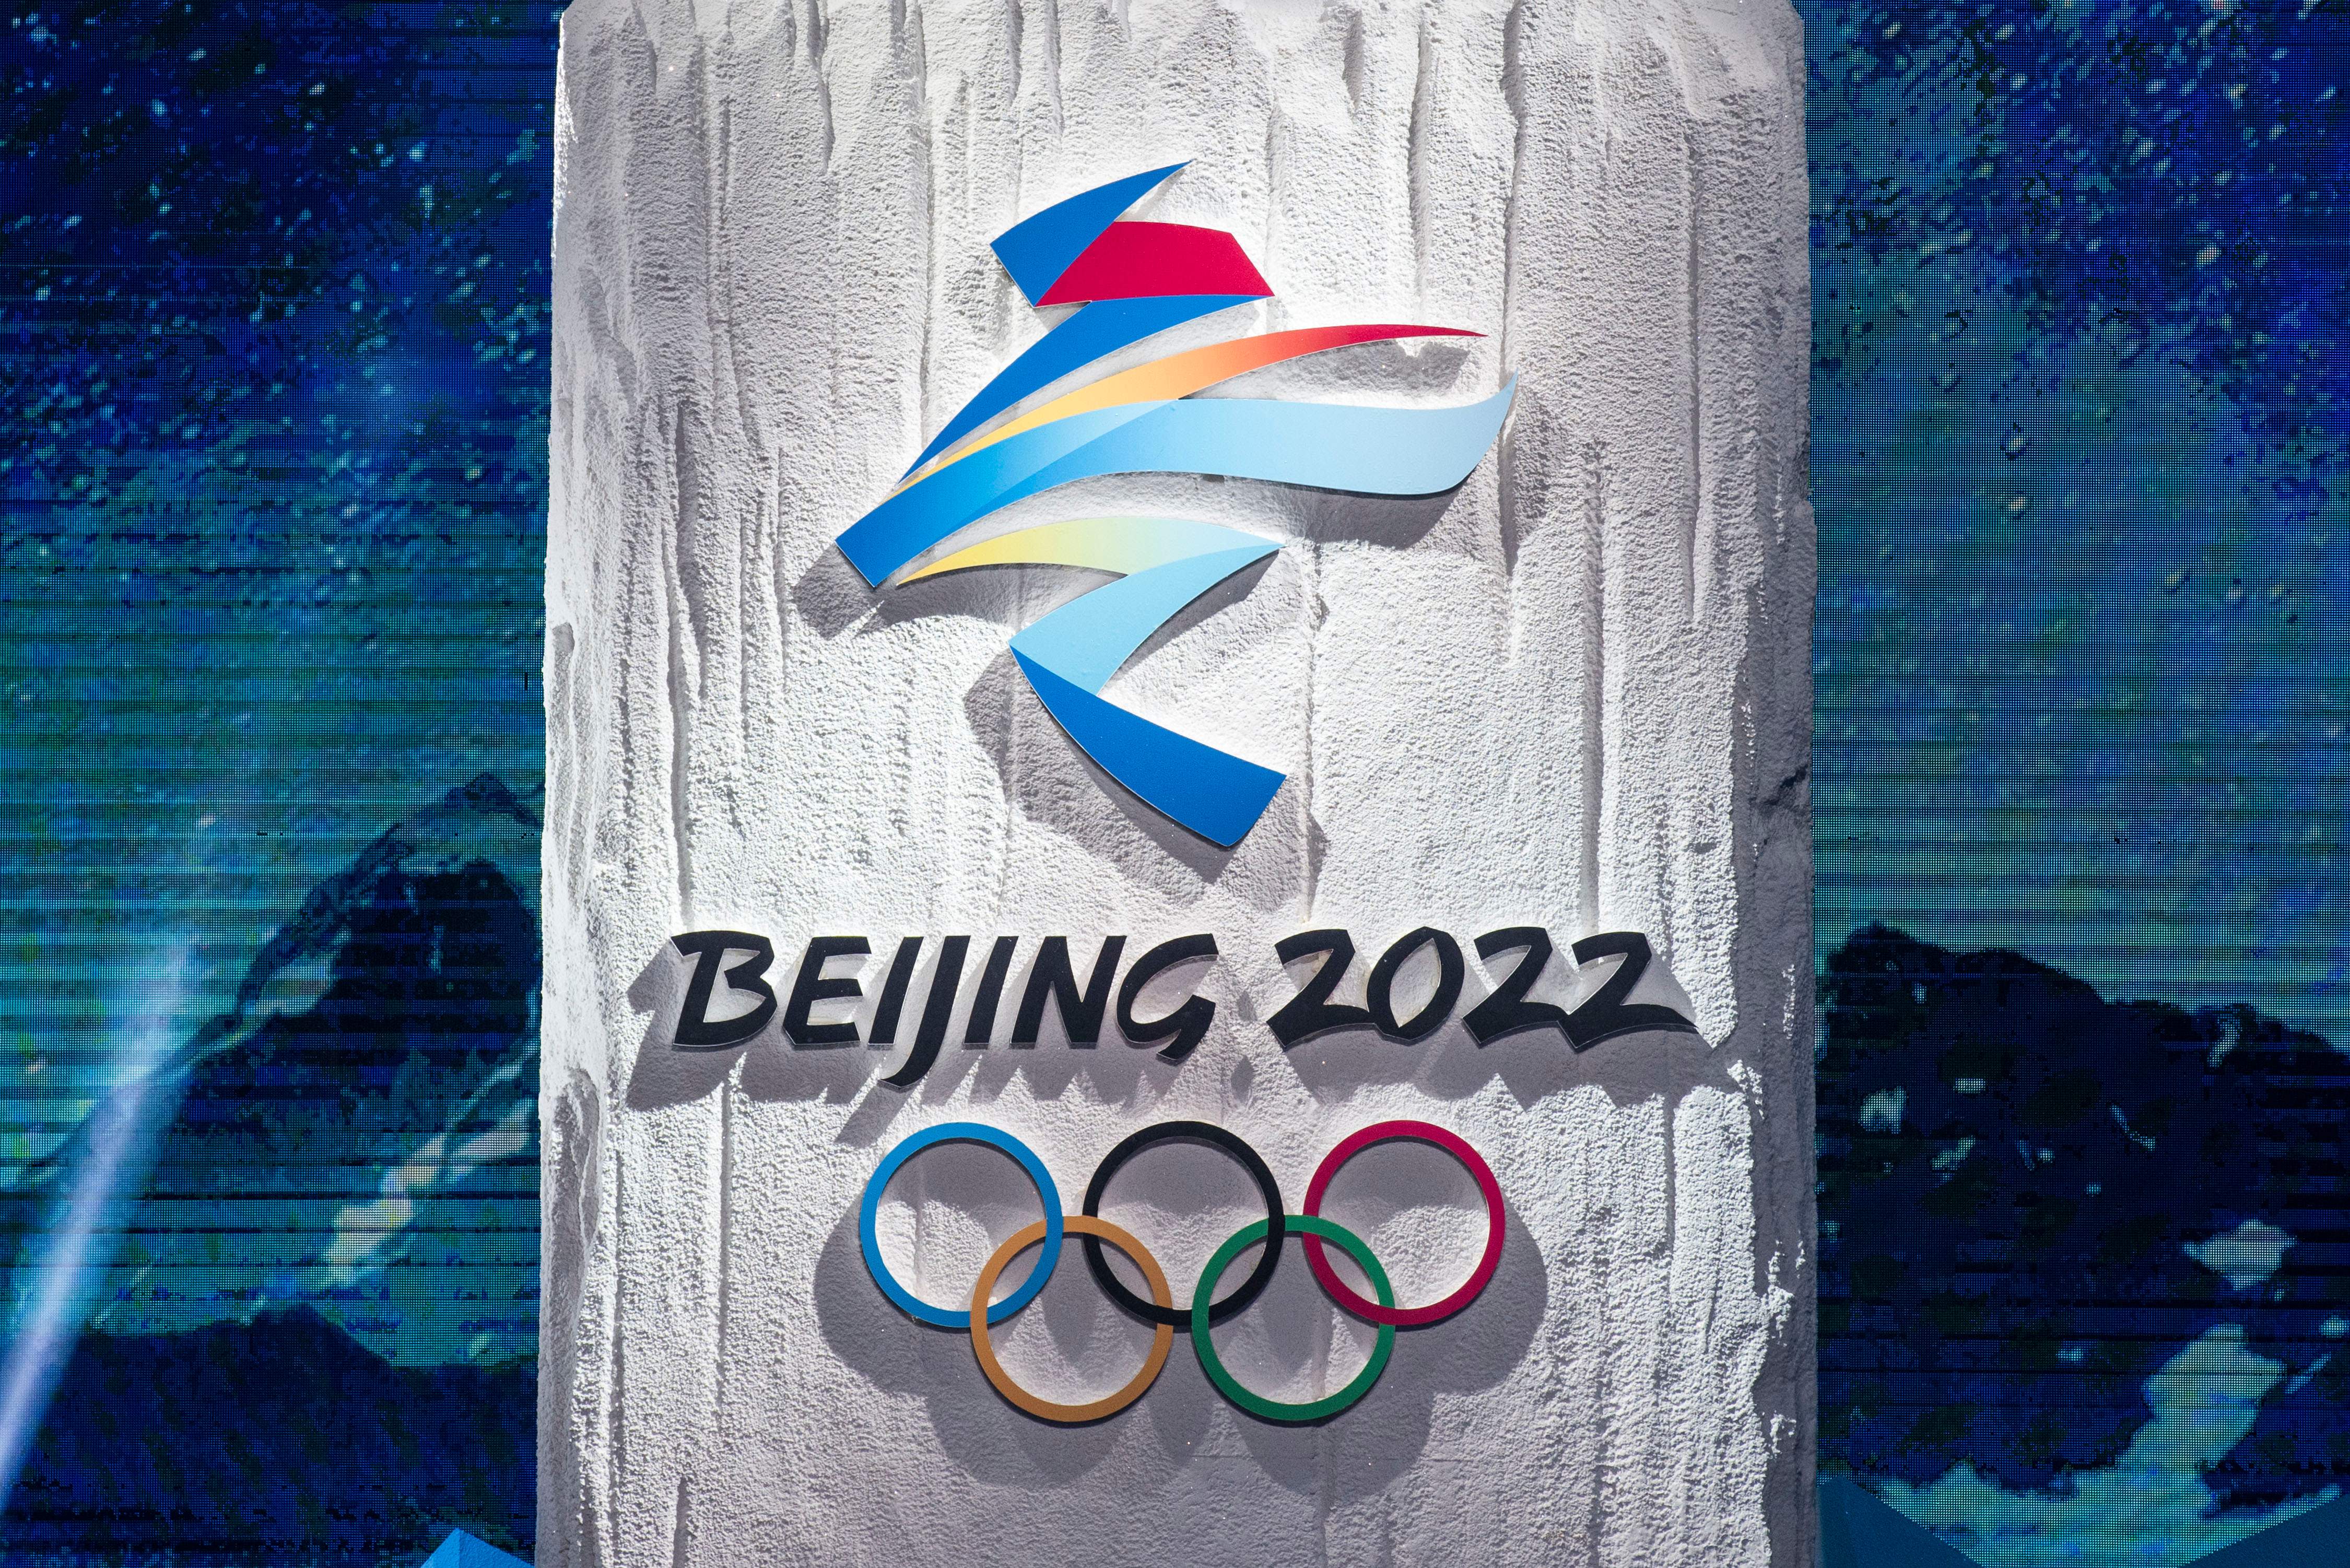 Everything We Know So Far About the 2022 Winter Olympics